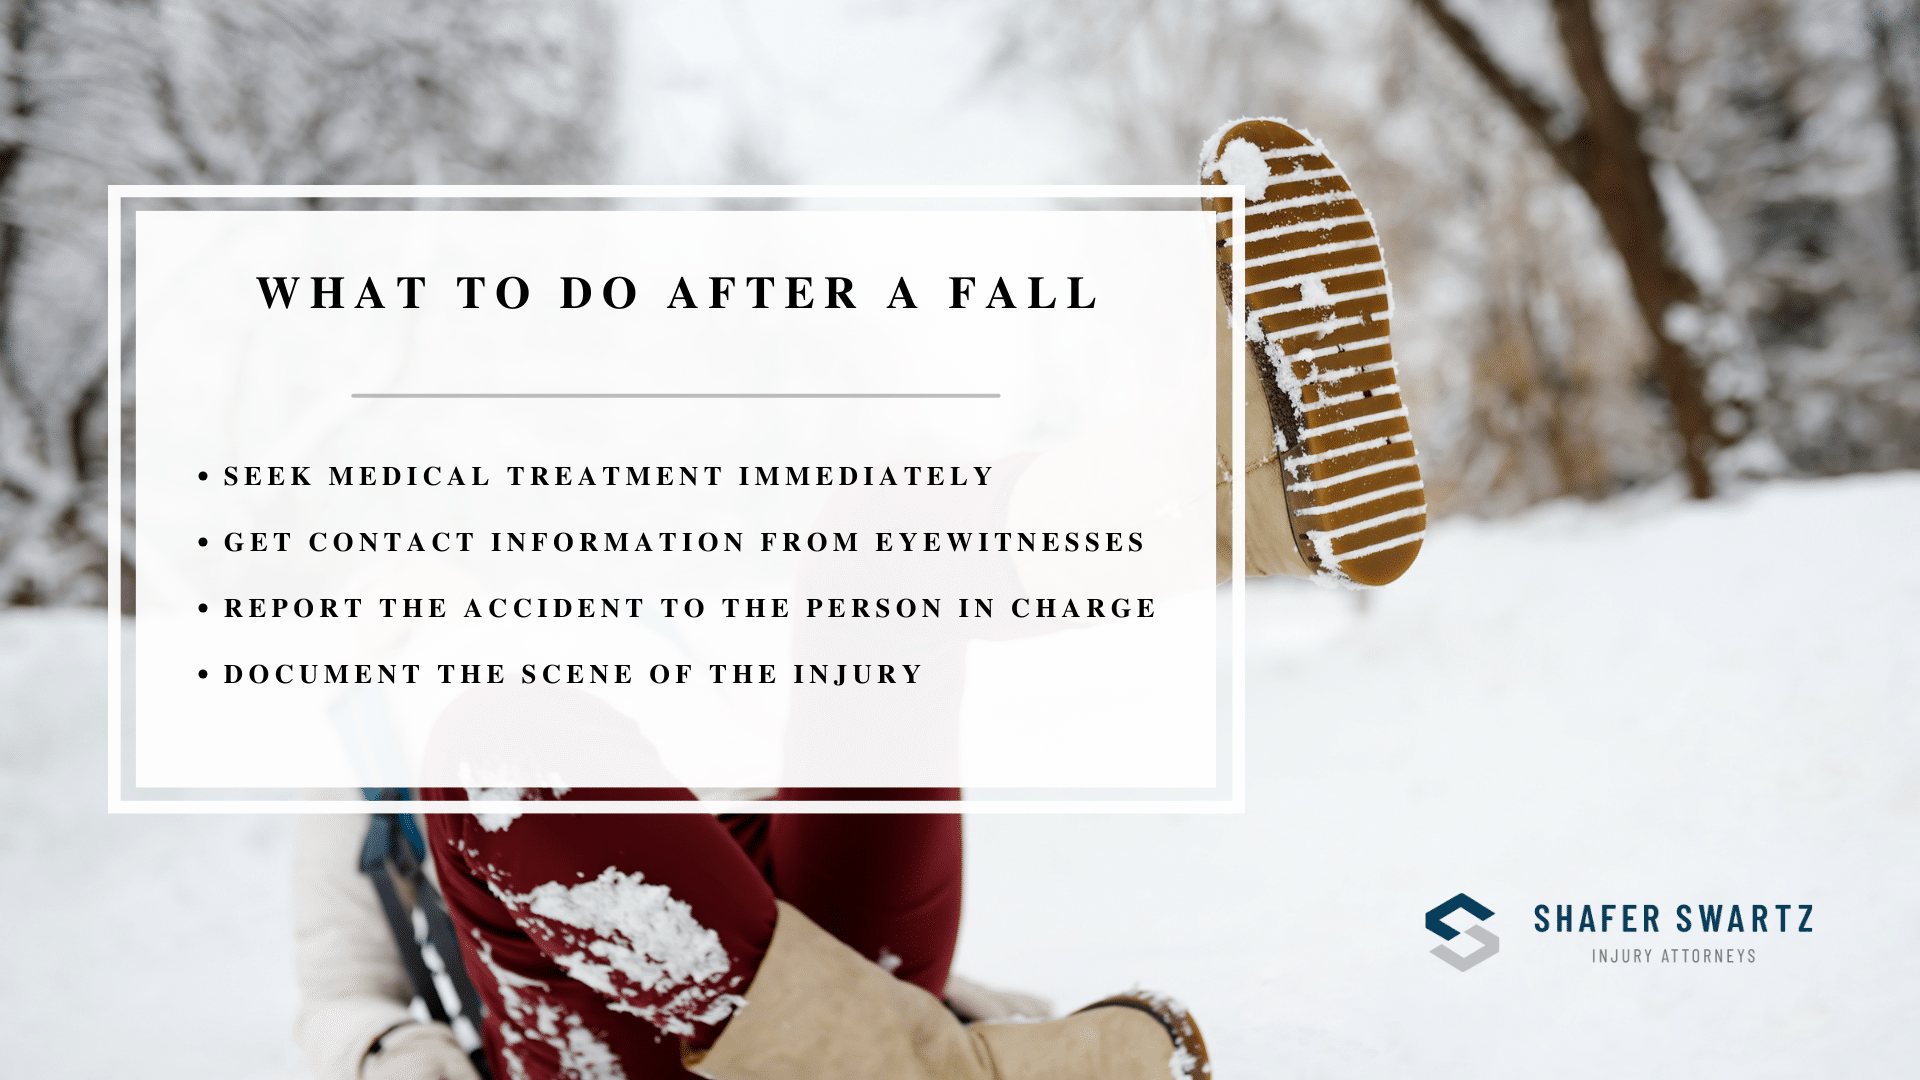 Infographic image of what to do after a fall